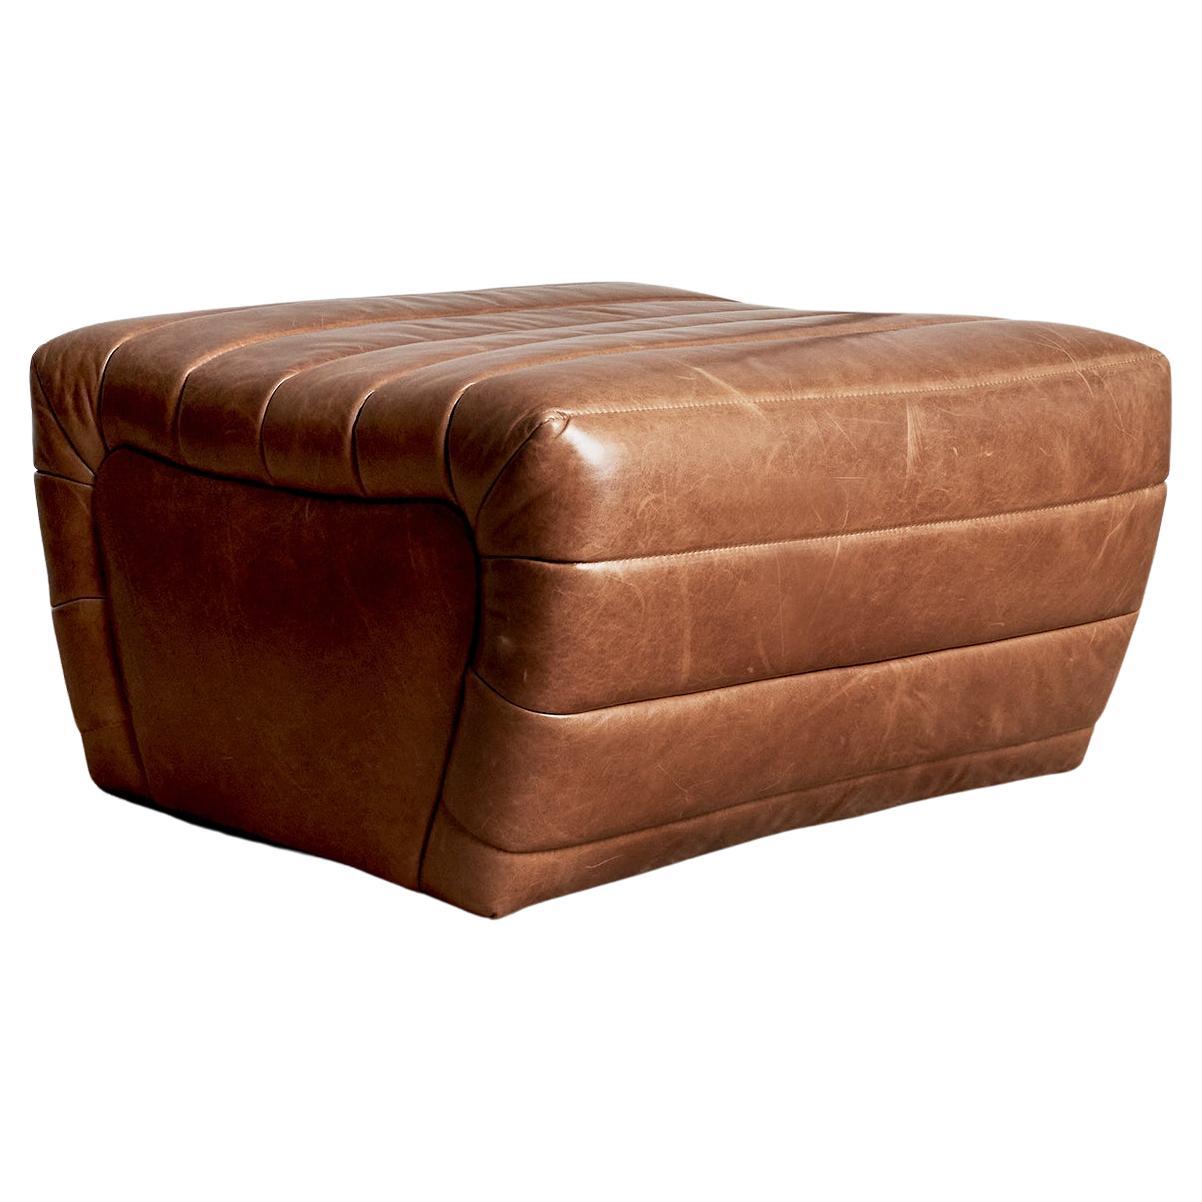 Brunoy Leather Ottoman by Christiane Lemieux For Sale